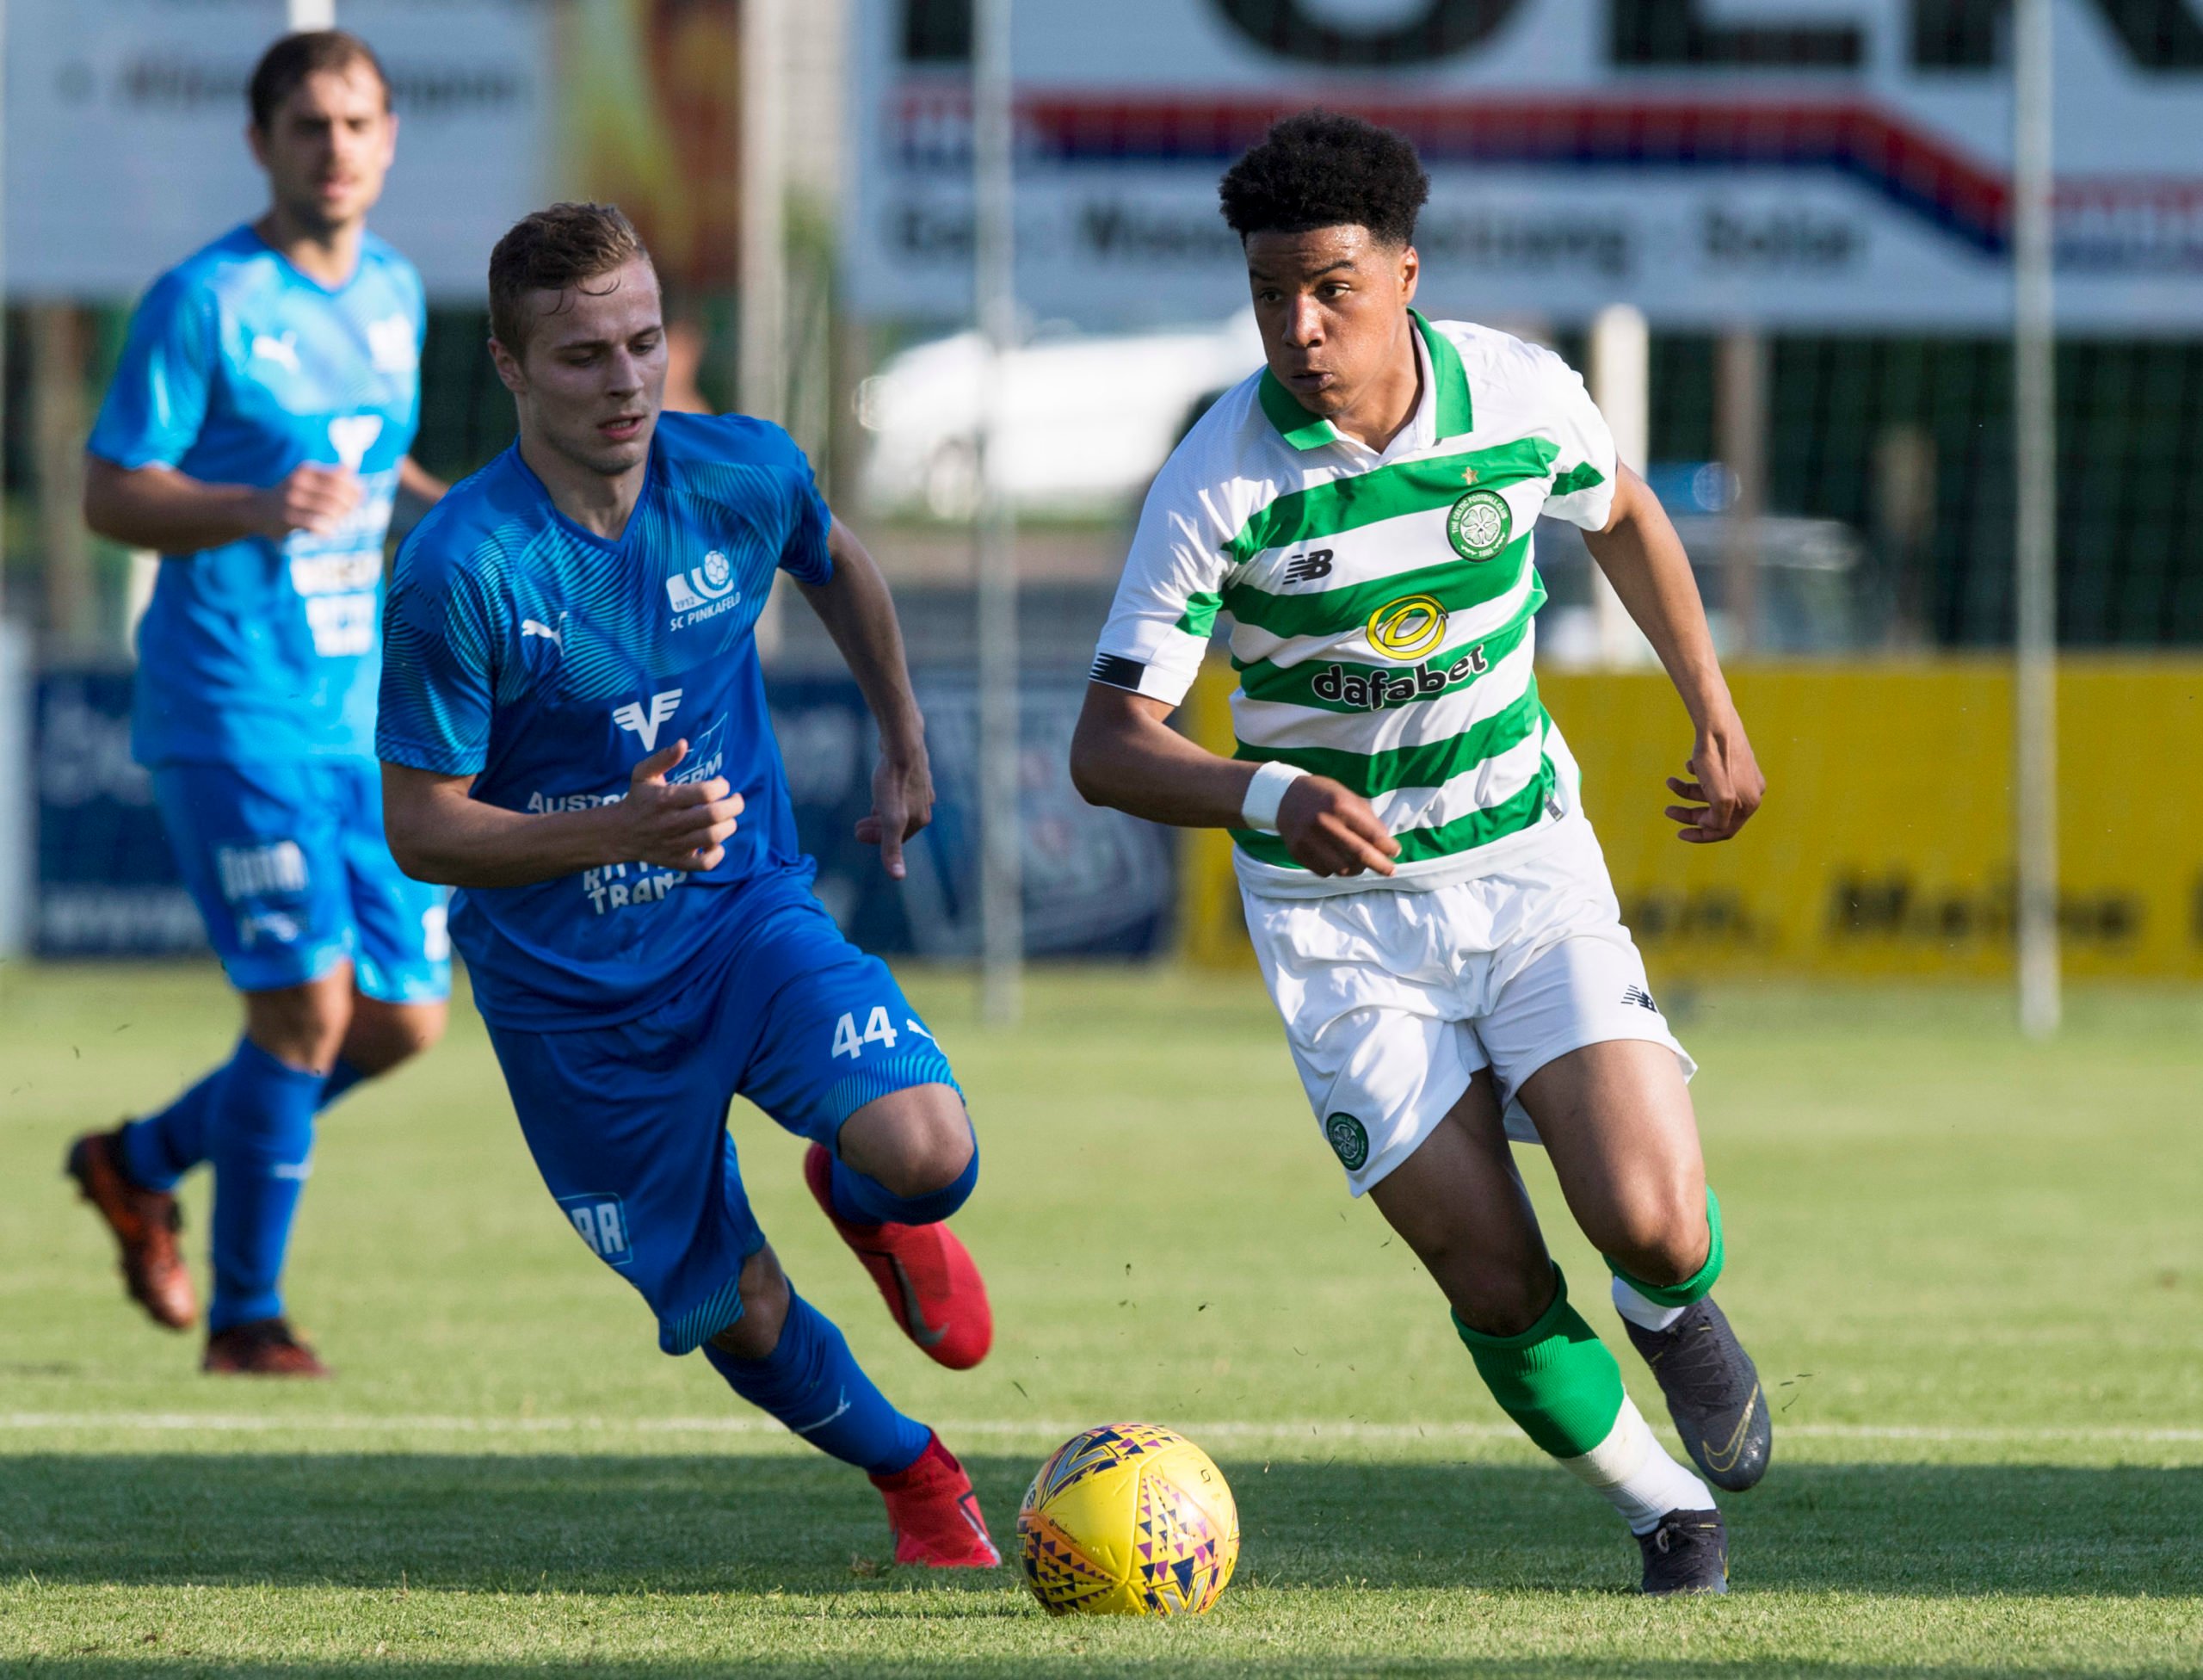 Celtic youngster Armstrong Okoflex